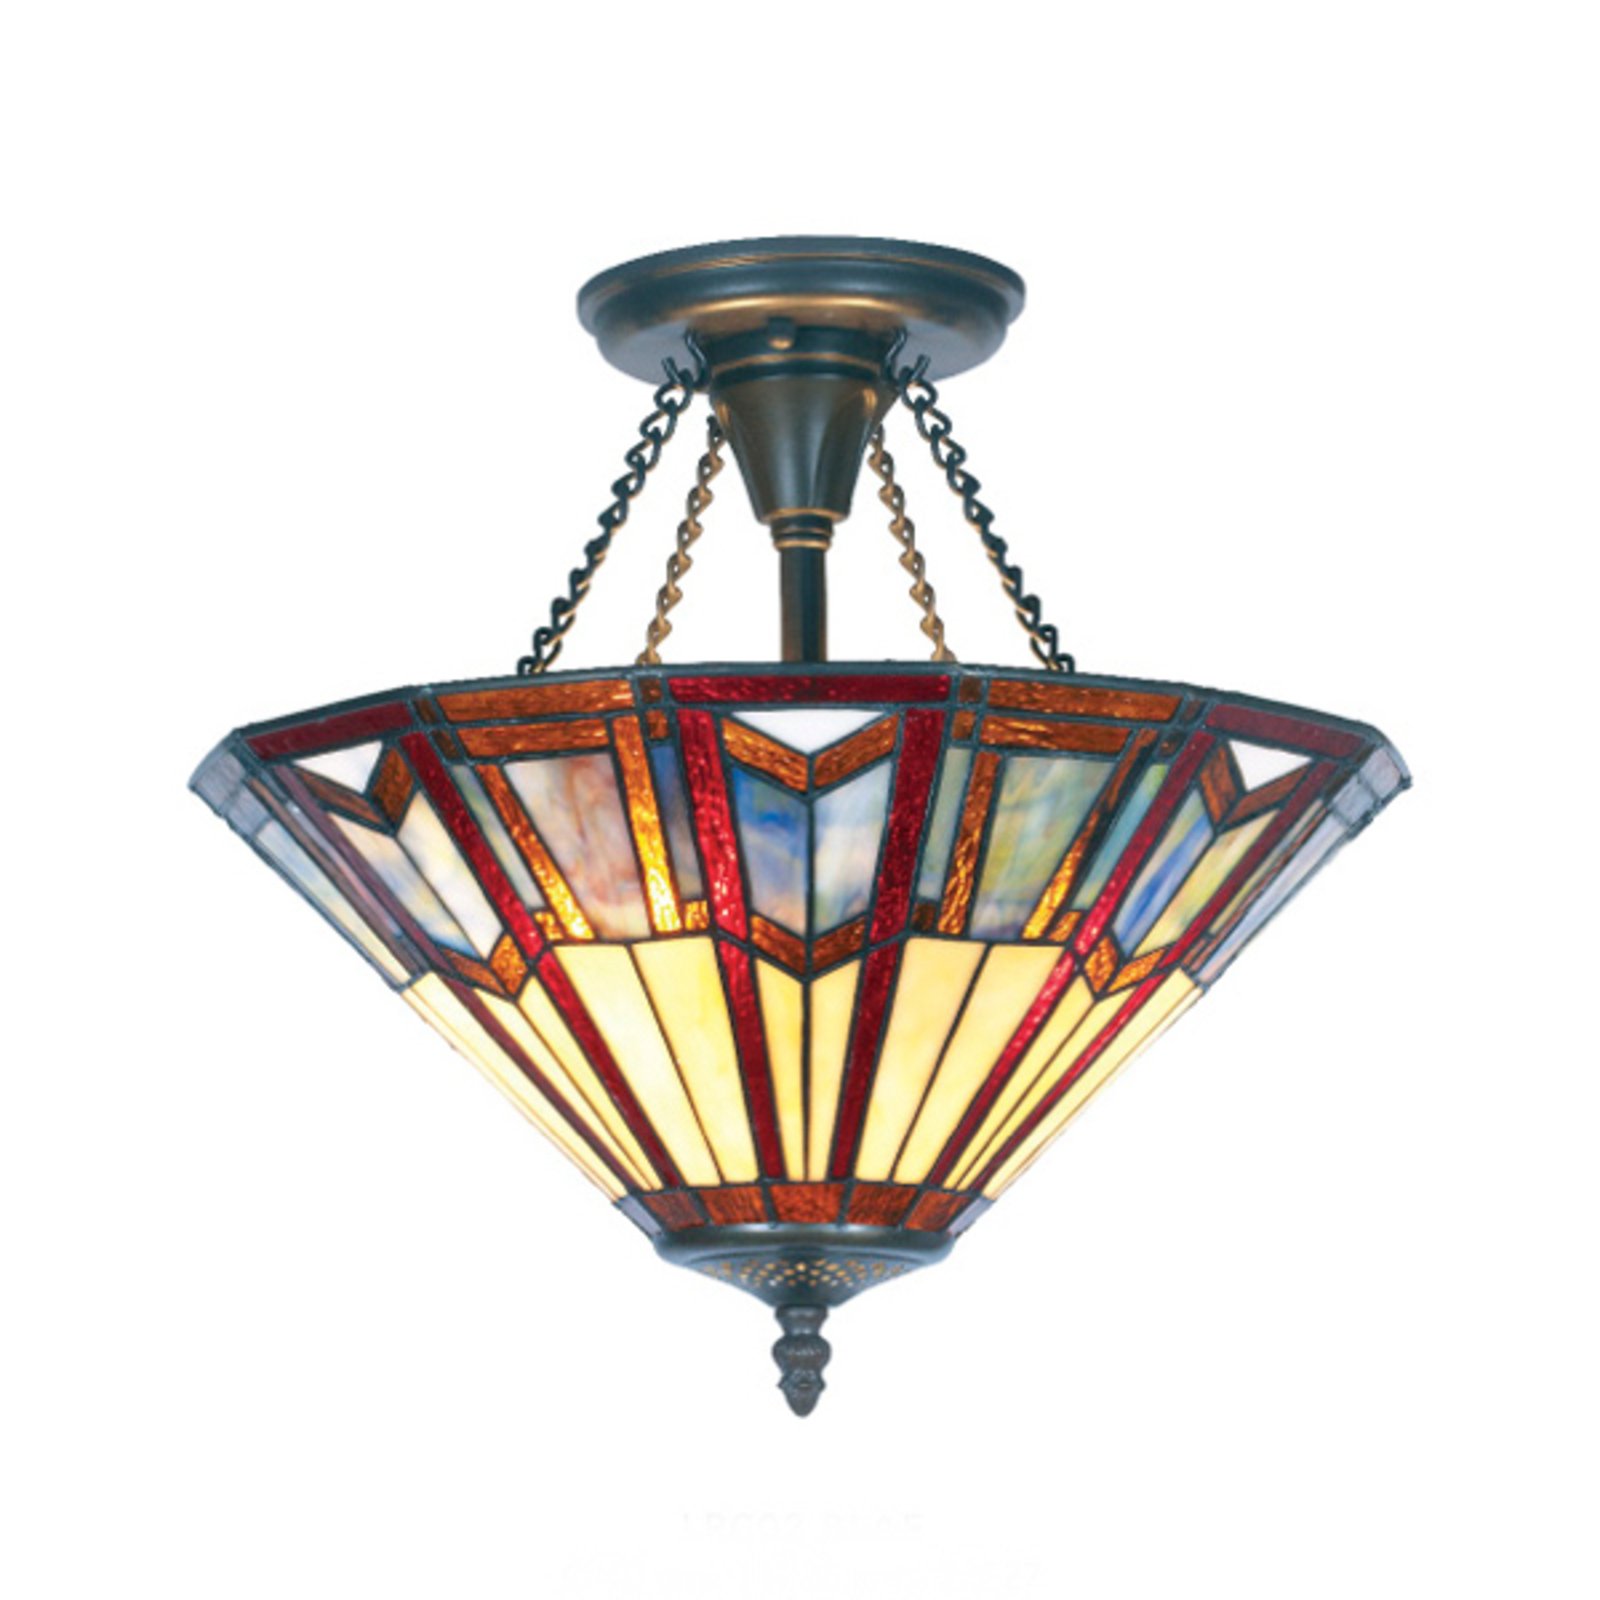 LILLIE Tiffany-style ceiling light